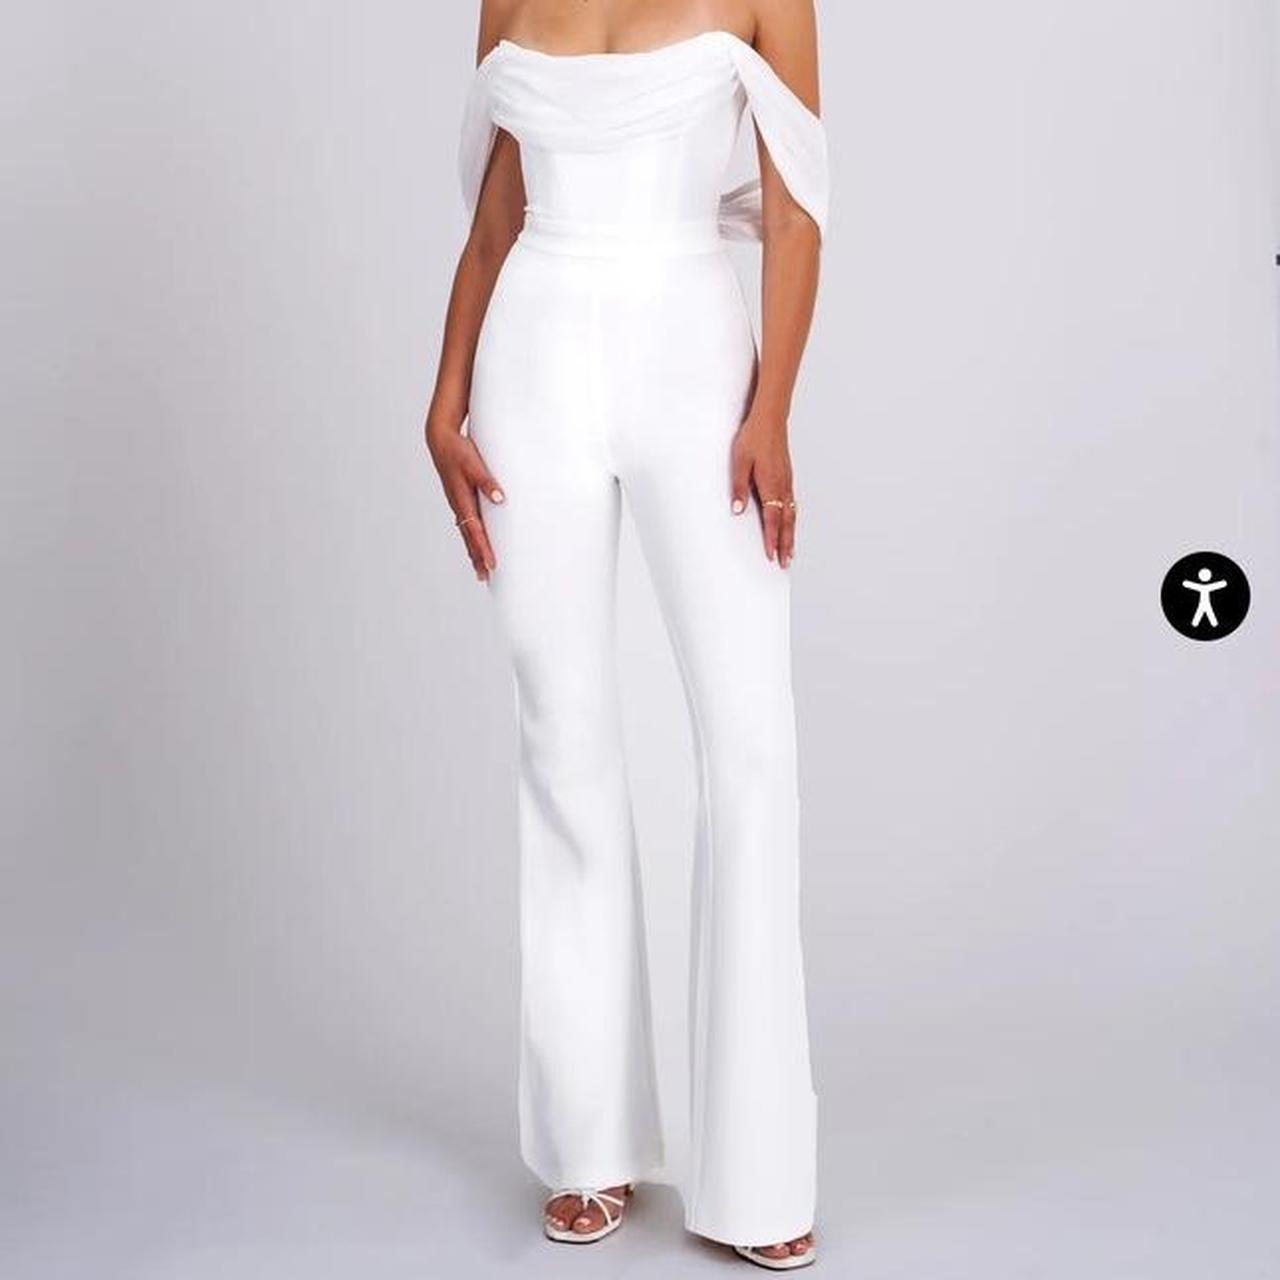 NEVER WORN Miss circle New York white jumpsuit! This... - Depop